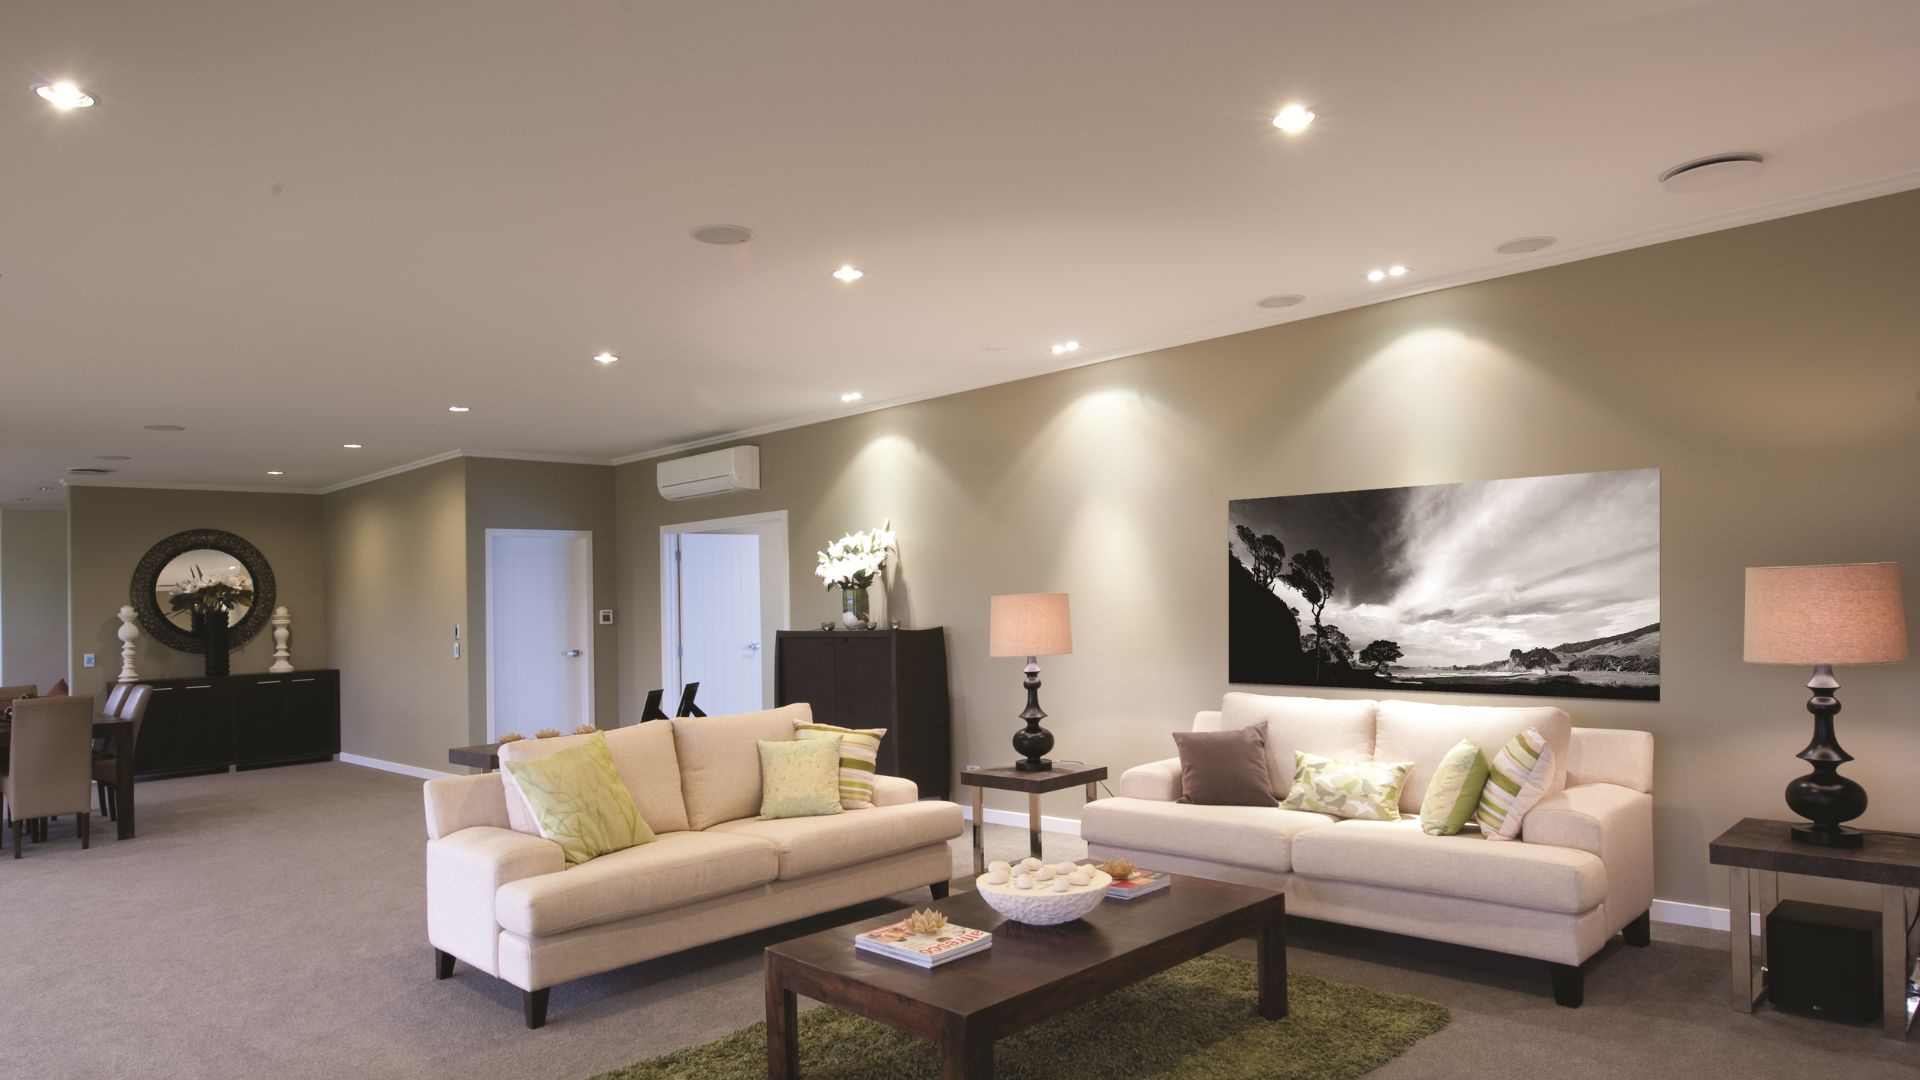 How to choose the right downlight